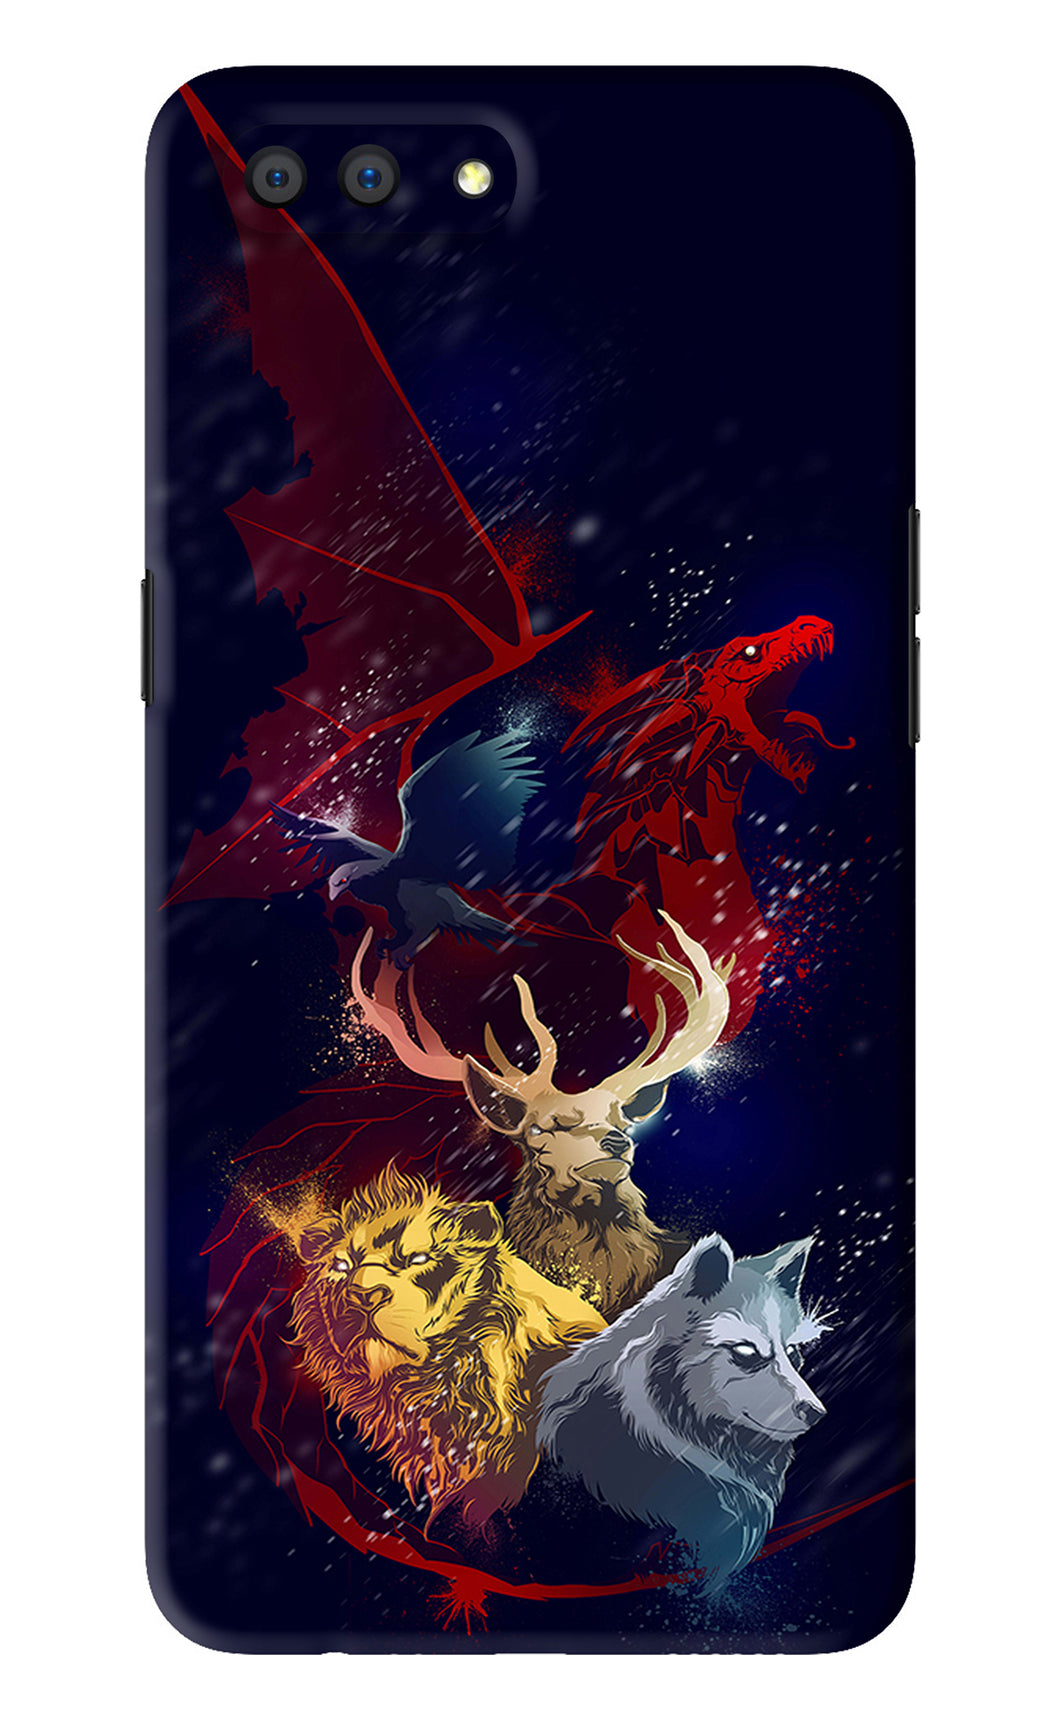 Game Of Thrones Realme C1 Back Skin Wrap